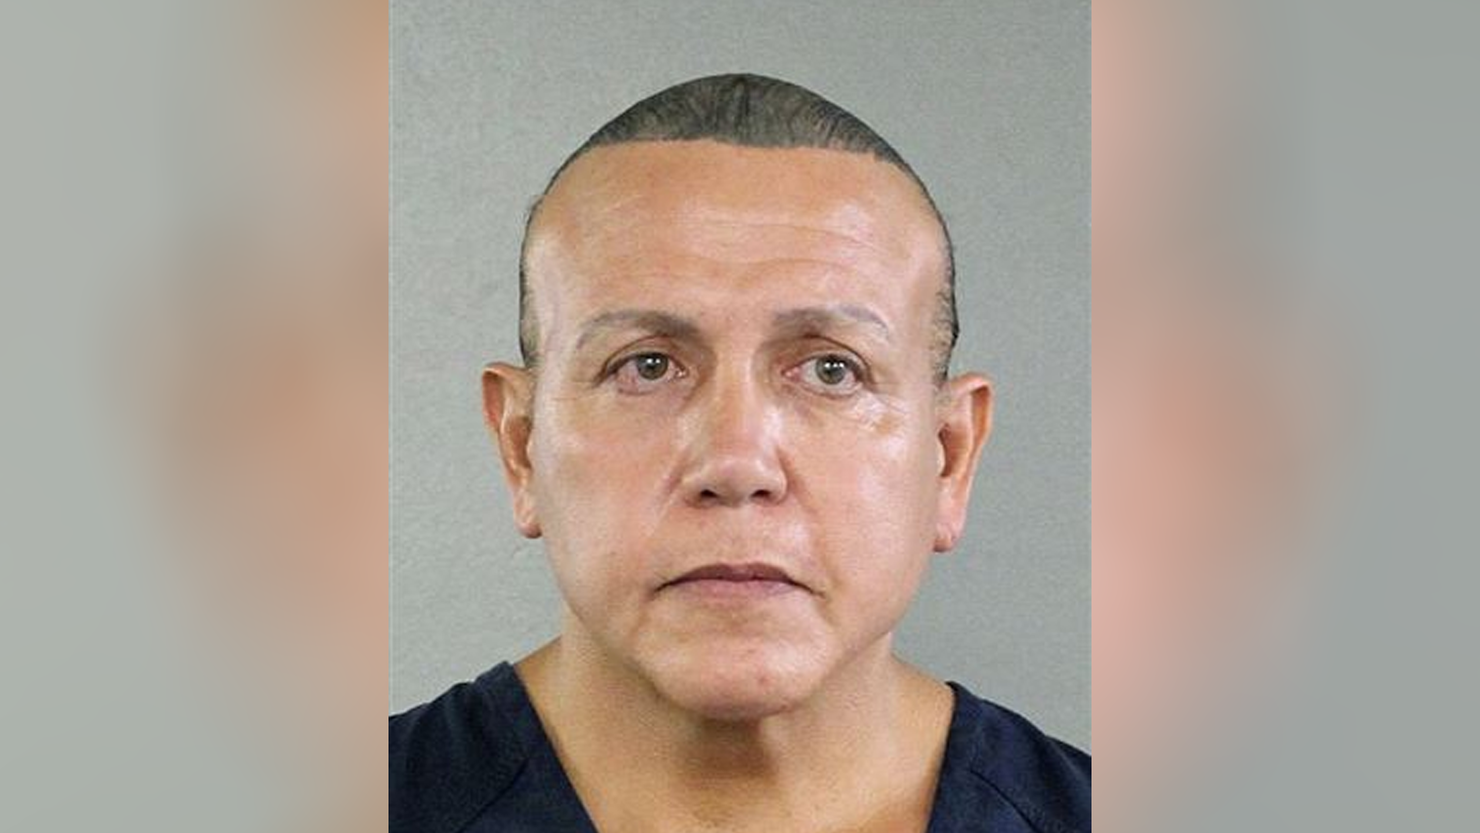 cesar sayoc indicted on 30 counts